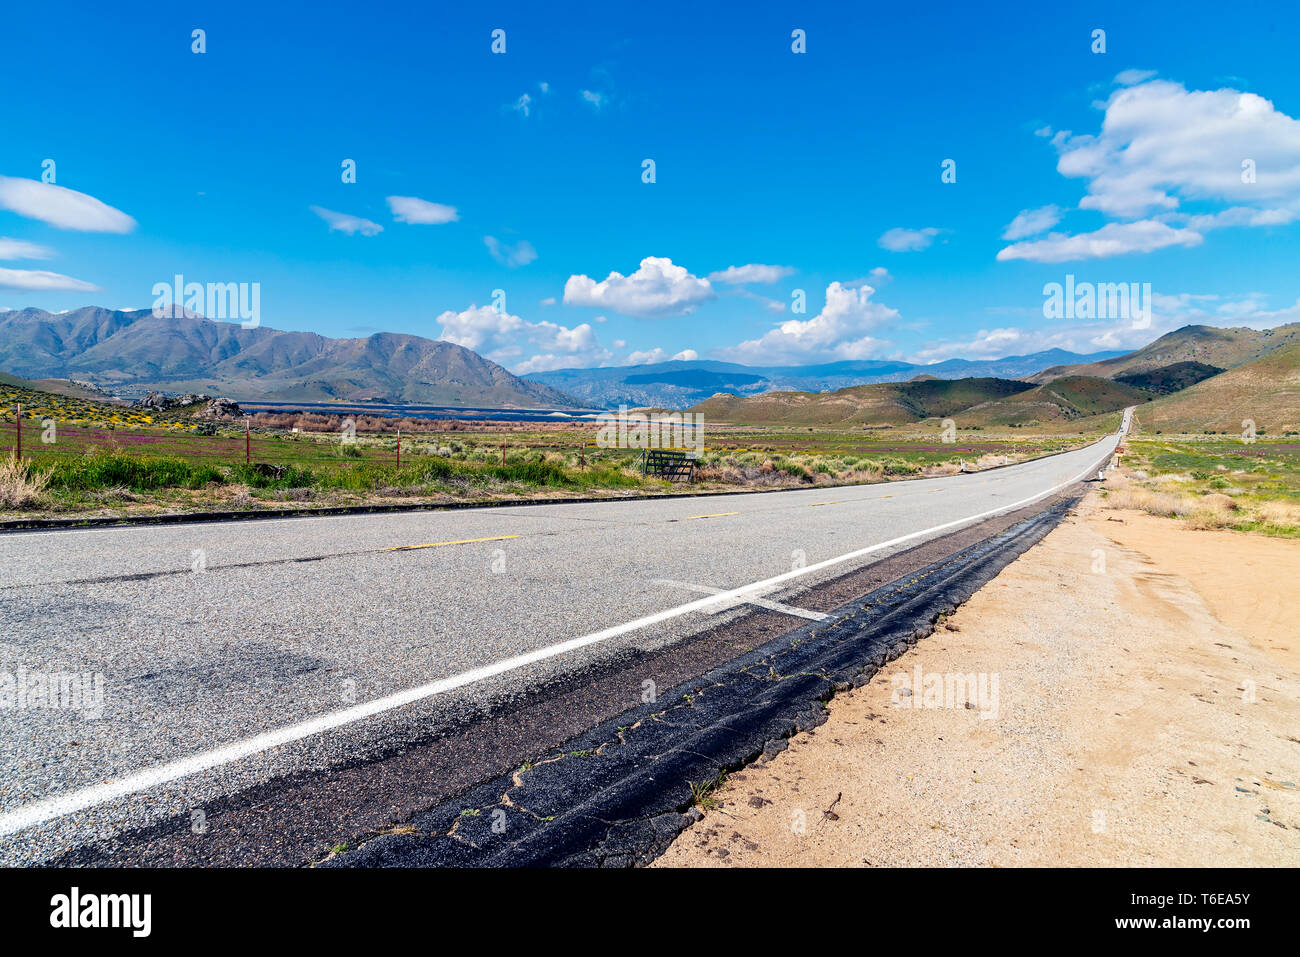 Long straight rural road leading towards mountains beyond under bright blue skies with white fluffy clouds. Stock Photo